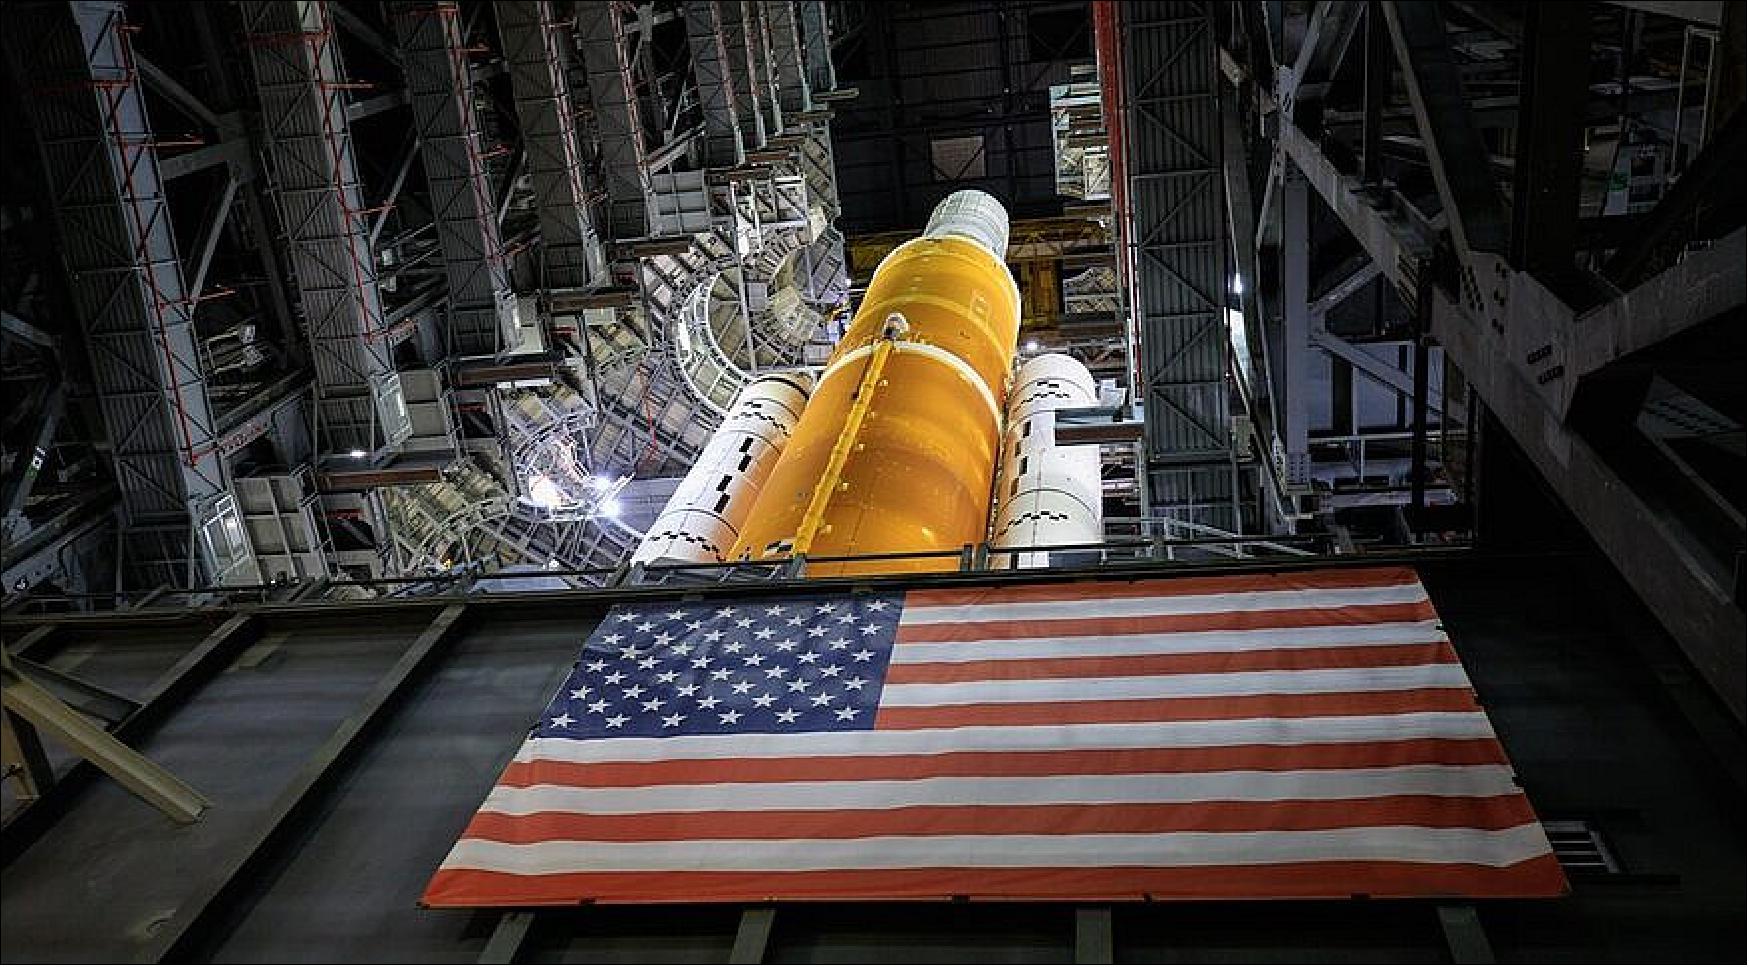 Figure 9: NASA now plans to roll out the Space Launch System to its launch pad on the night of March 17 for tests that will include fueling the core stage and going through a practice countdown (image credit: NASA/Frank Michaux)